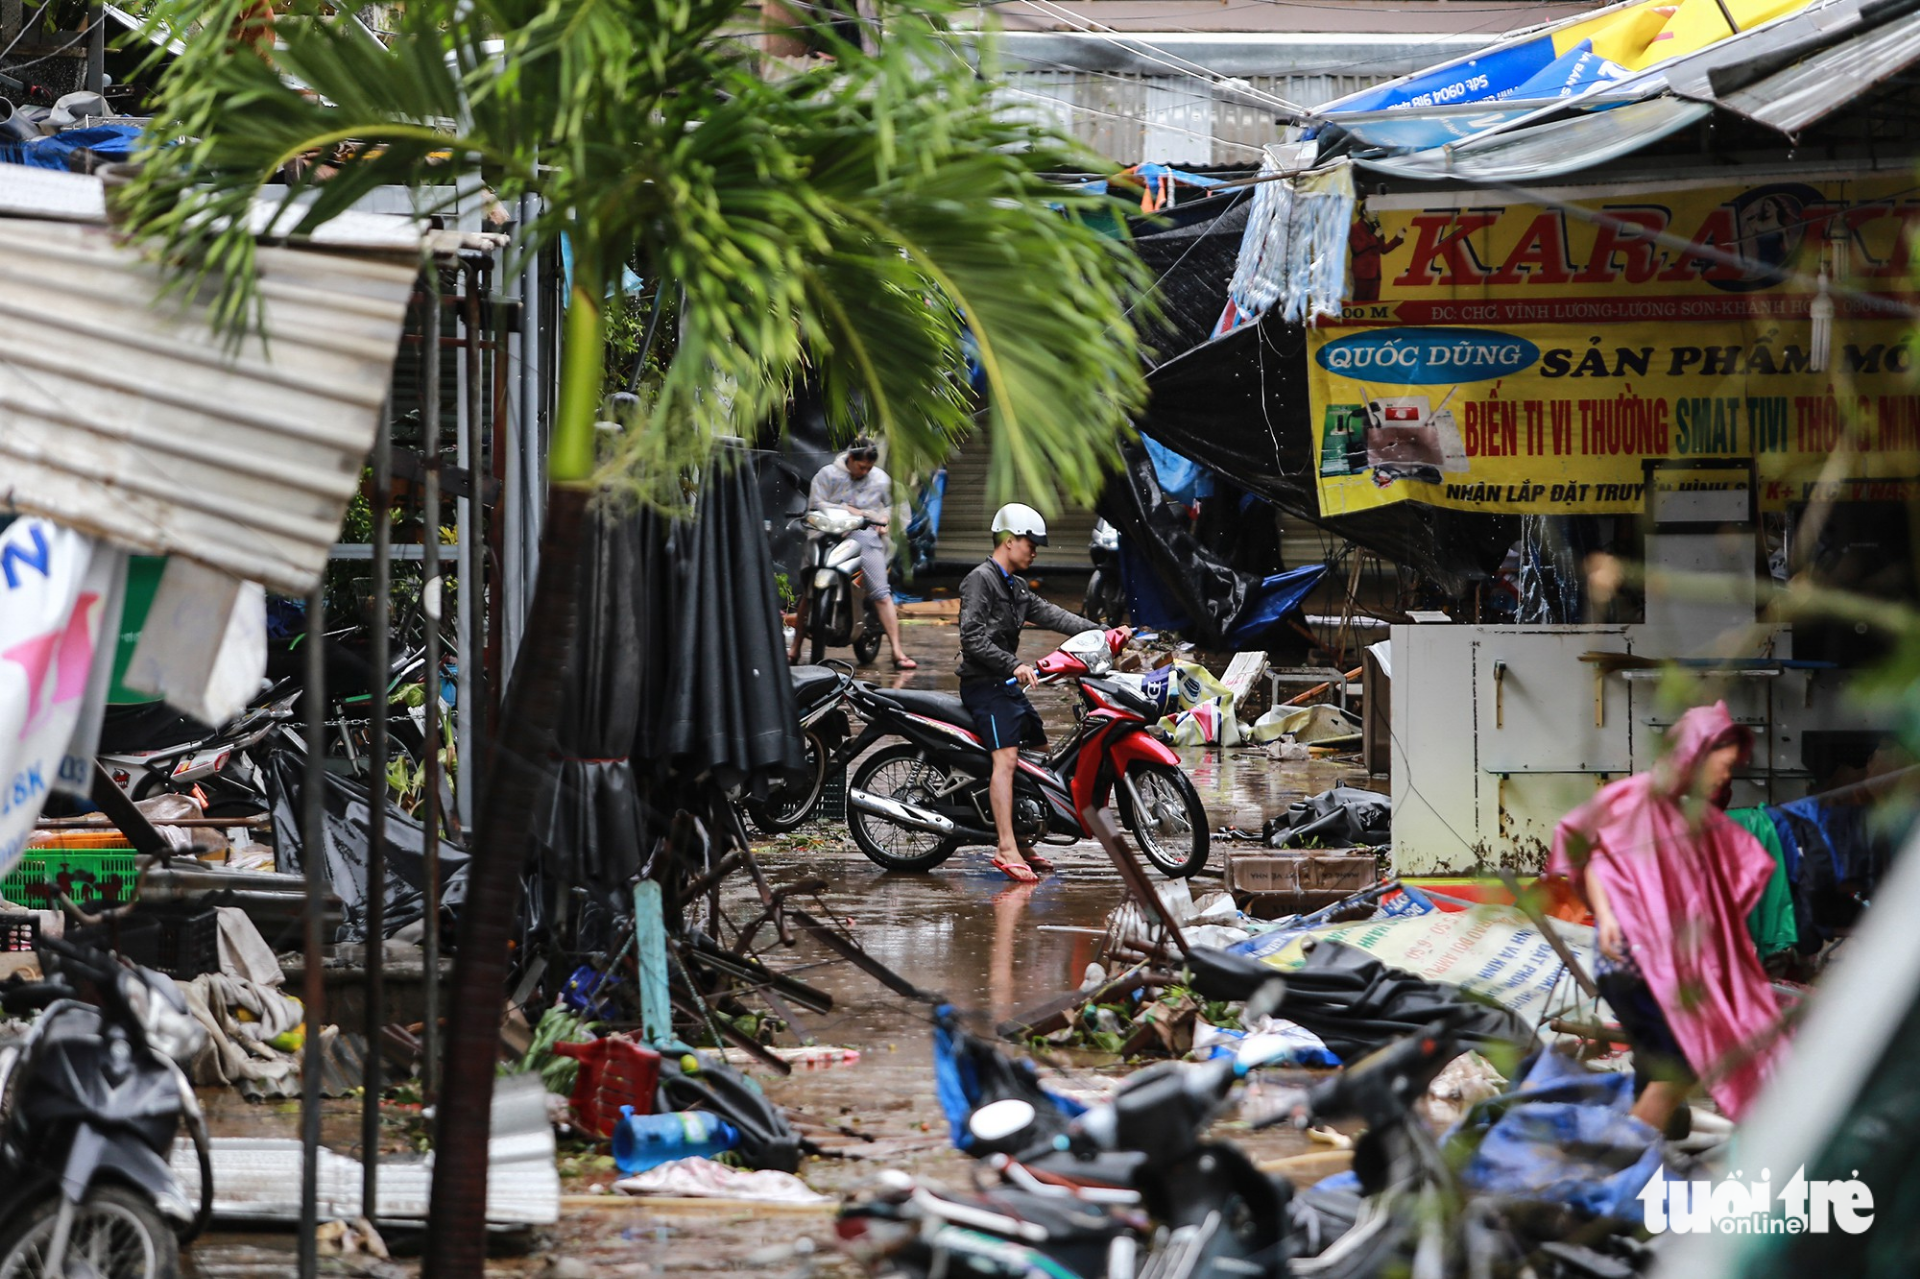 Houses along National Highway 1A in Khanh Hoa Province are devastated. Photo: Tuoi Tre